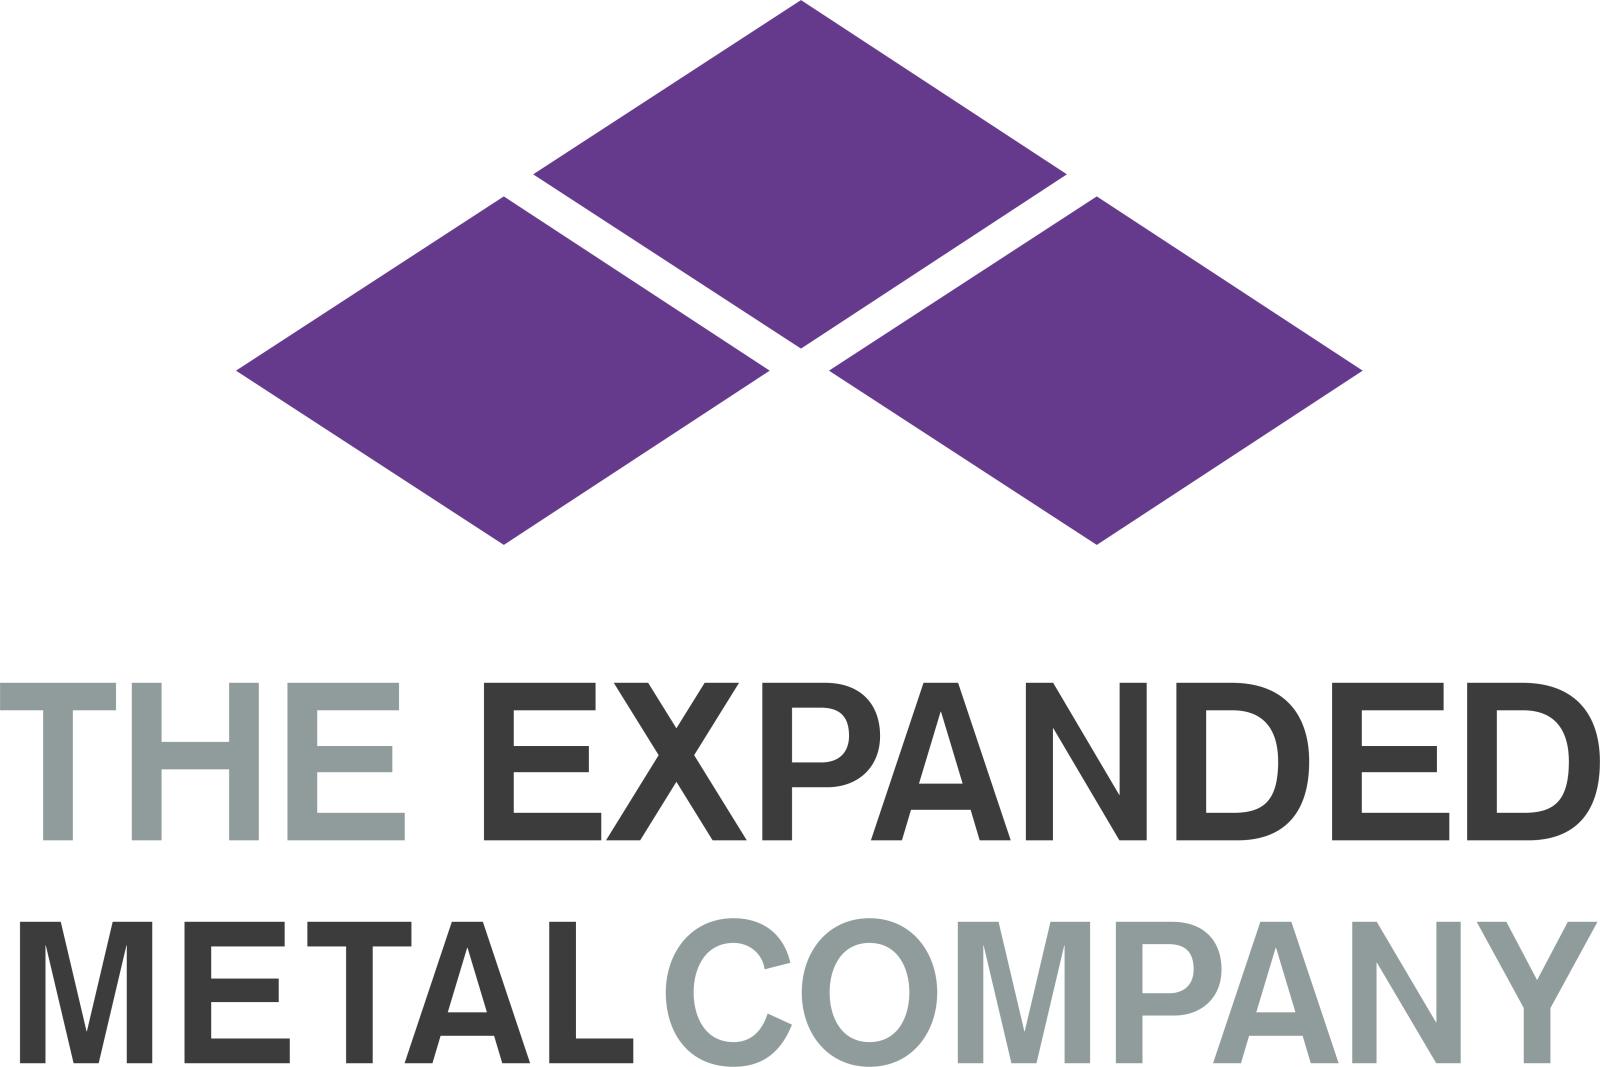 The Expanded Metal Company is shortlisted for business growth award